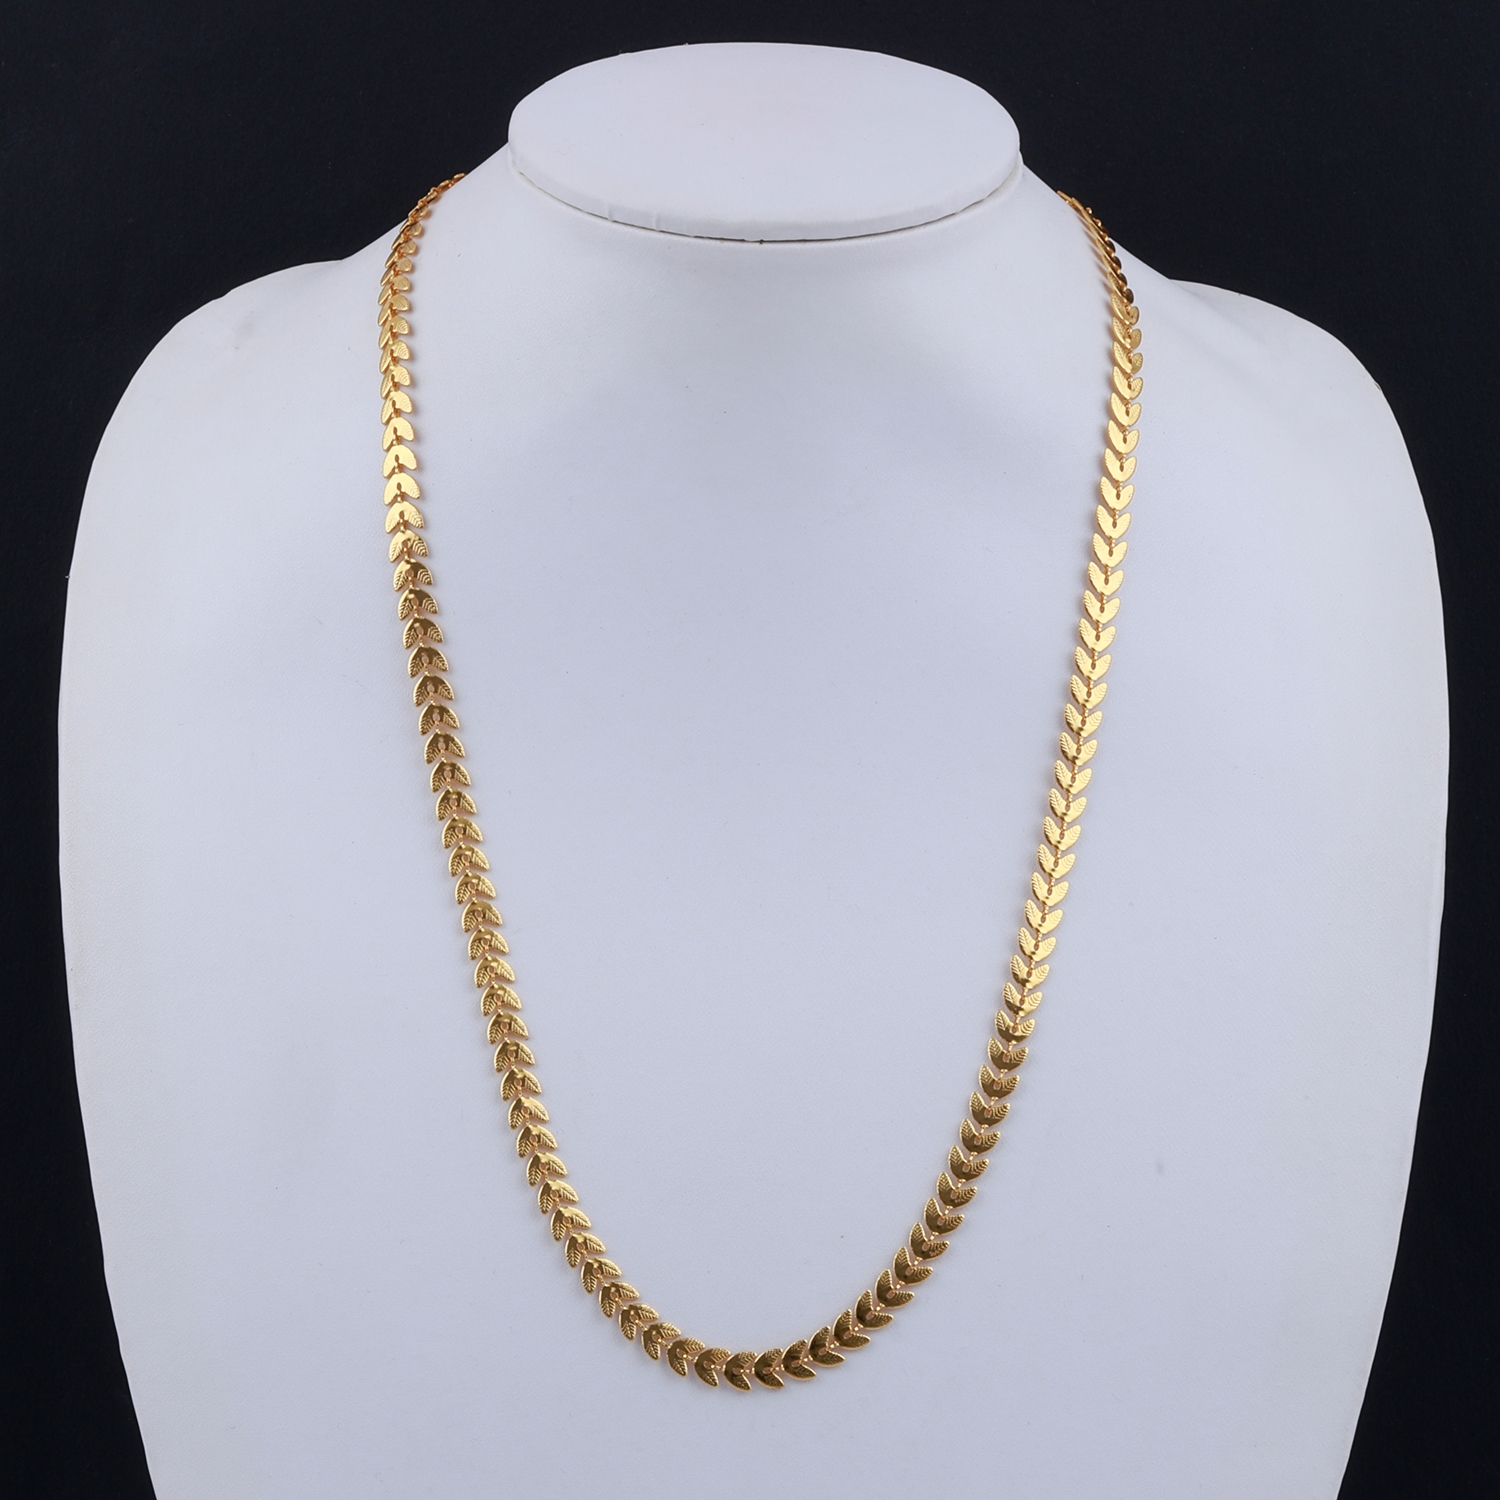 Paola Jewels | Paola Delicated Stylish Gold Chain For Women Girls  3